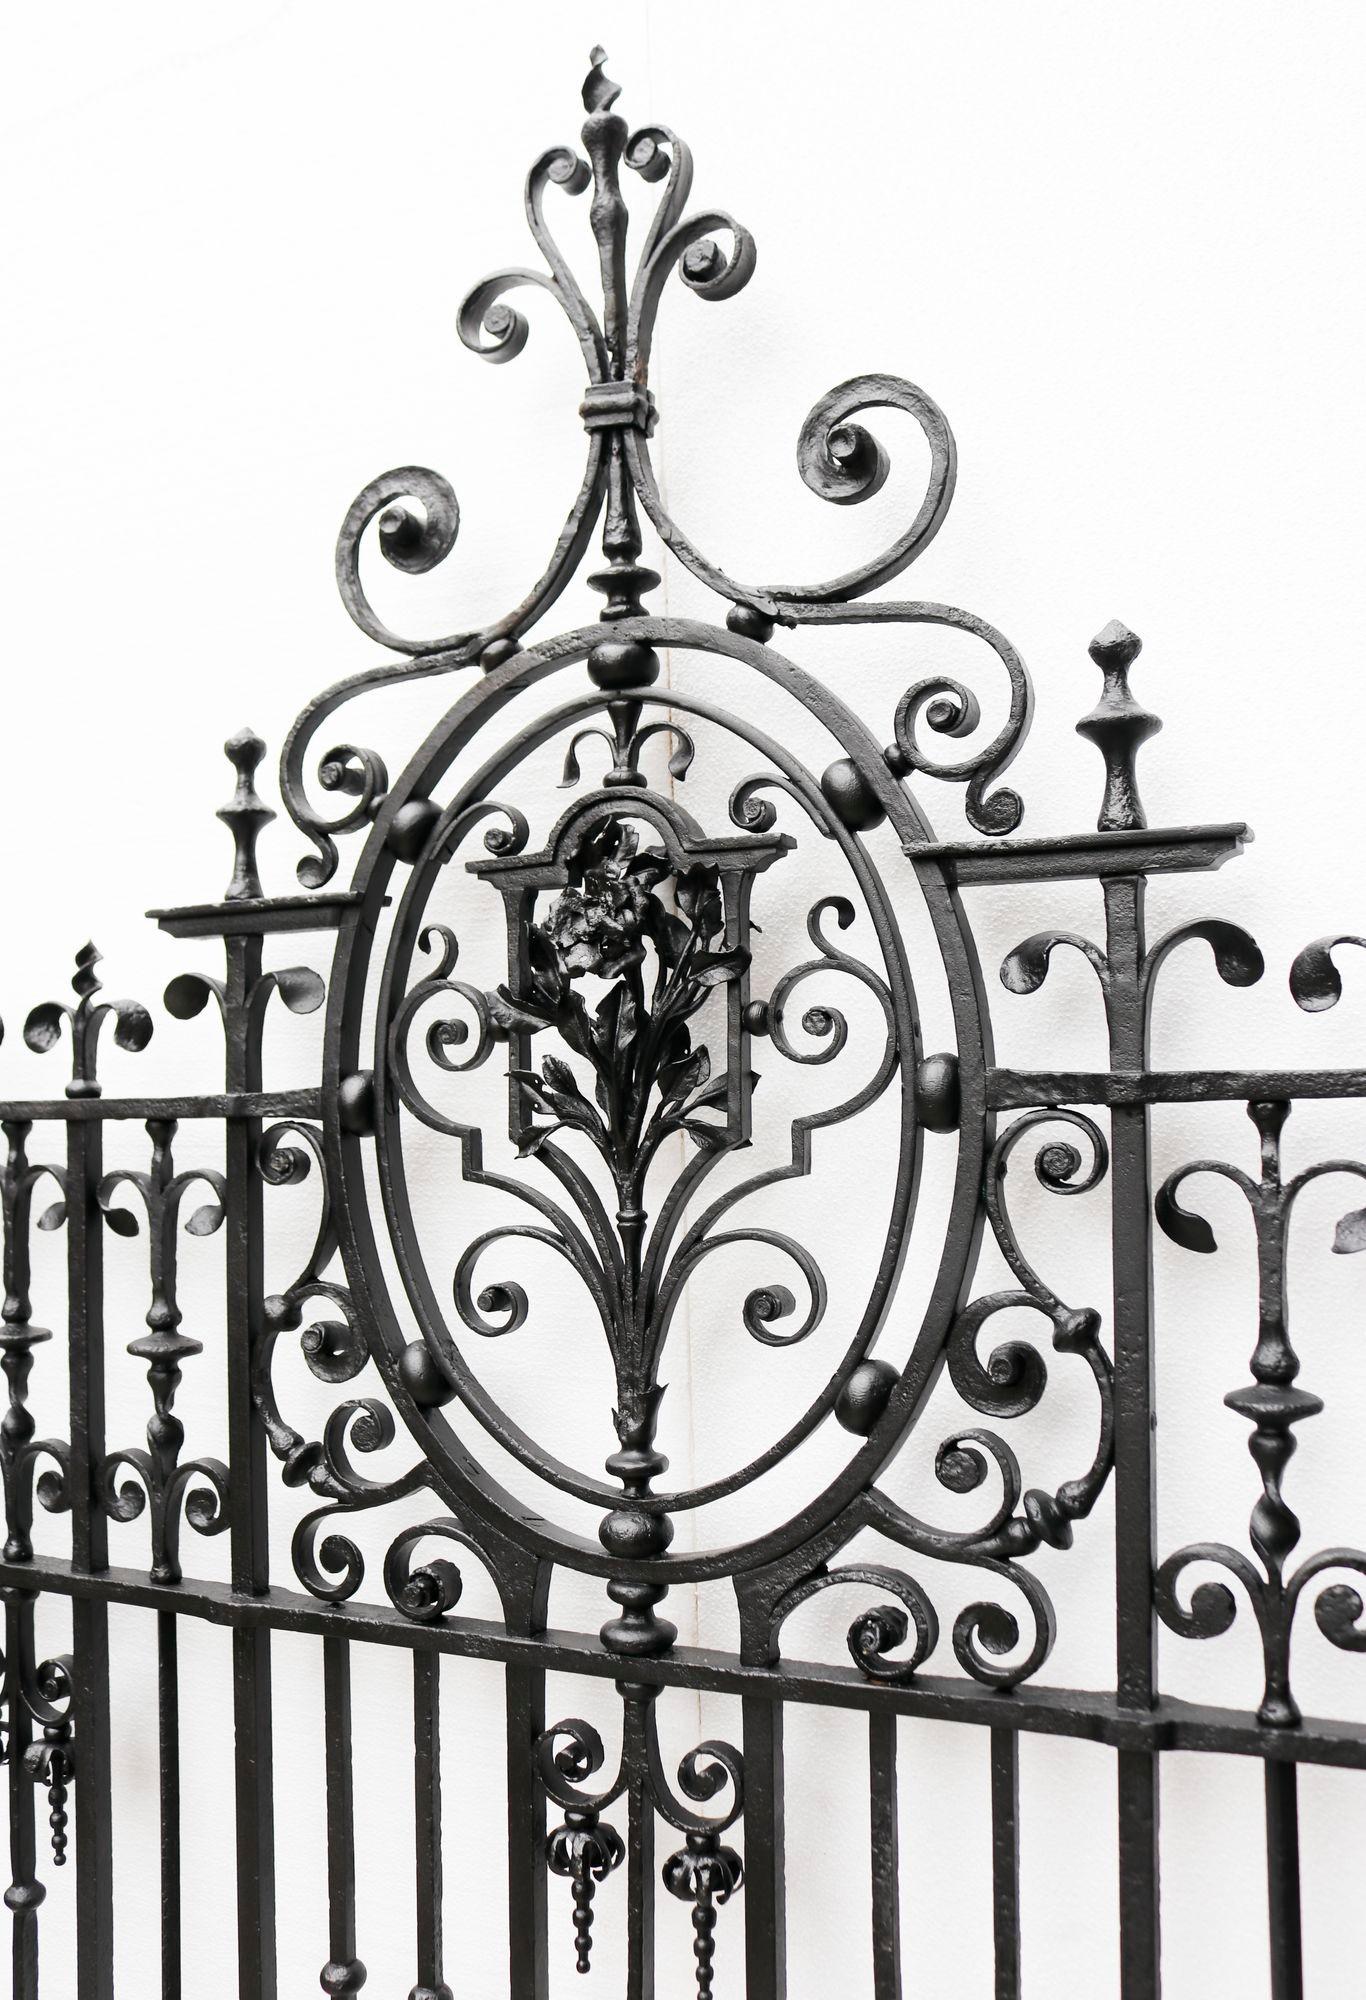 Grand Antique Georgian Wrought Iron Gate In Good Condition For Sale In Wormelow, Herefordshire